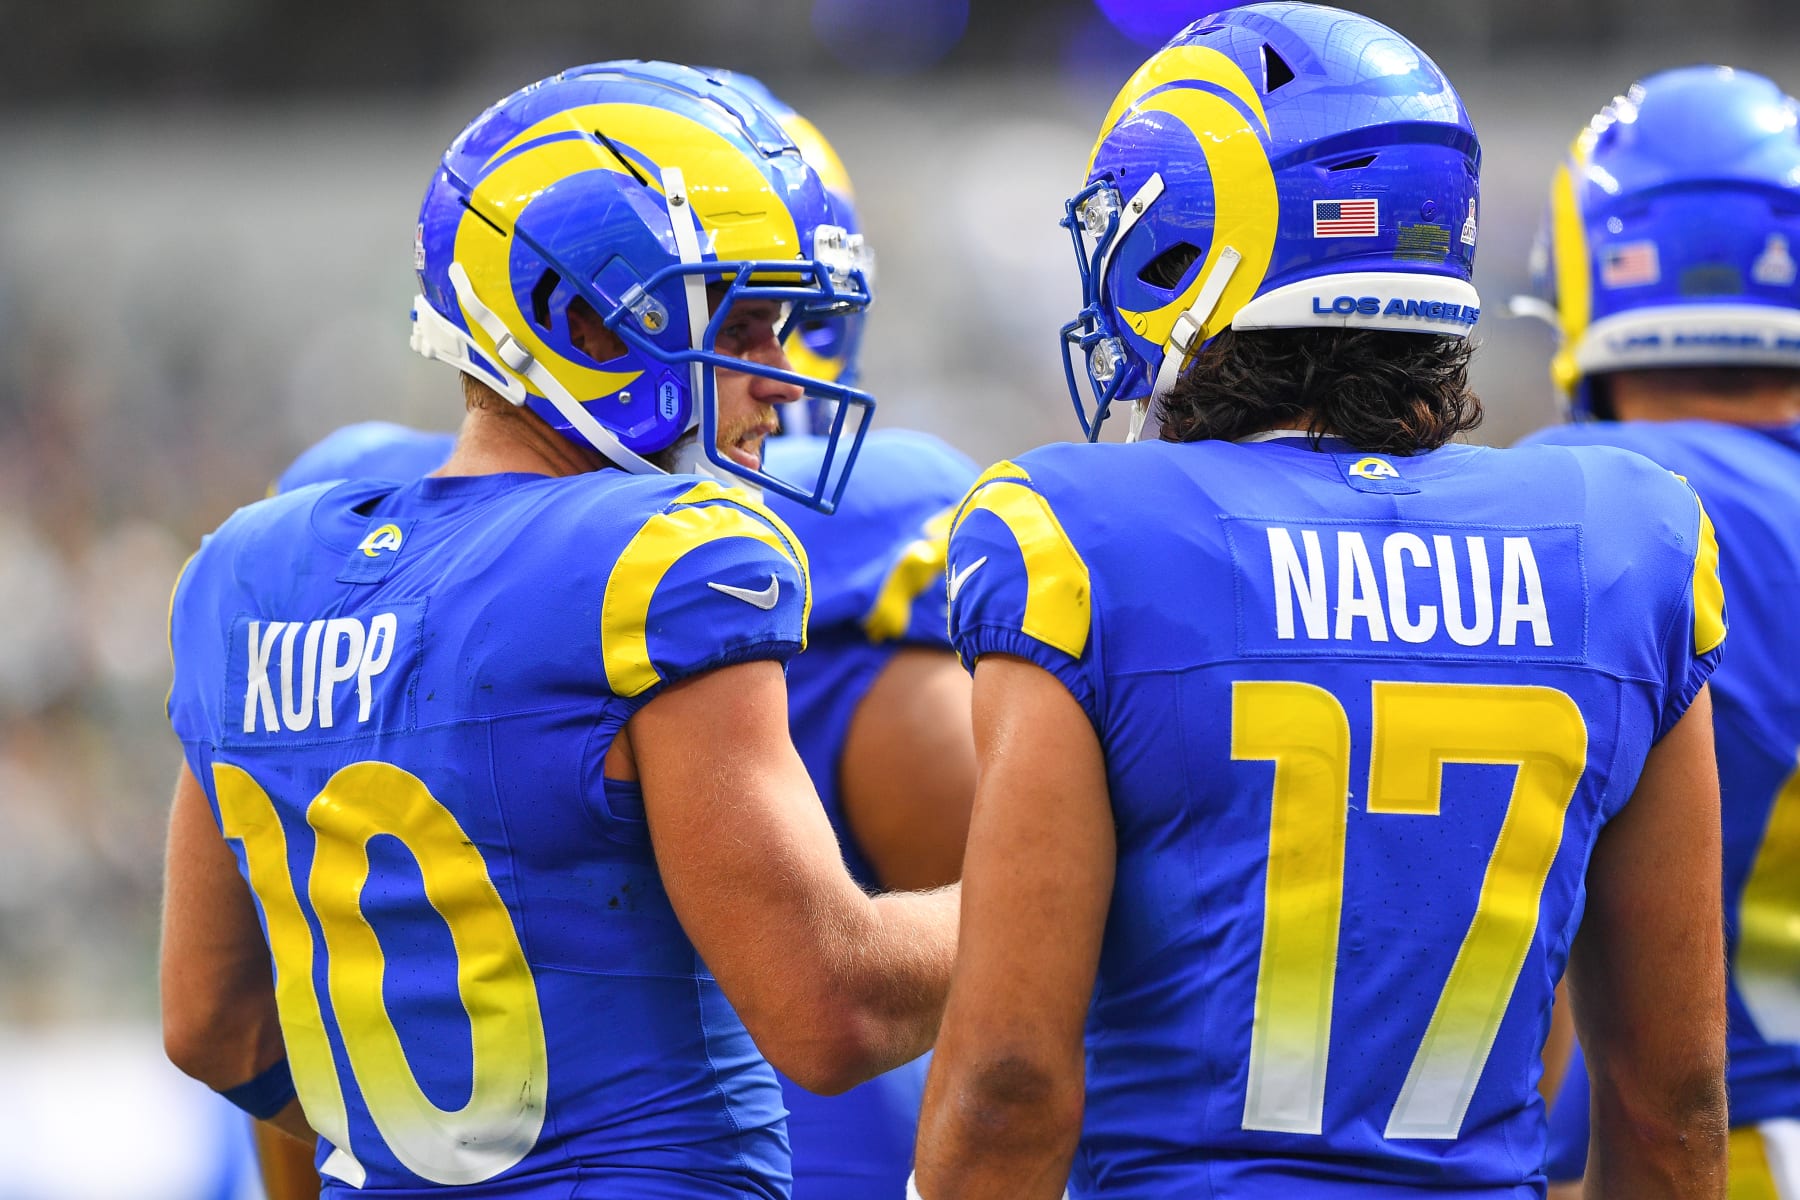 This Stat About The LA Rams Throwback Uniforms Has Me Convinced